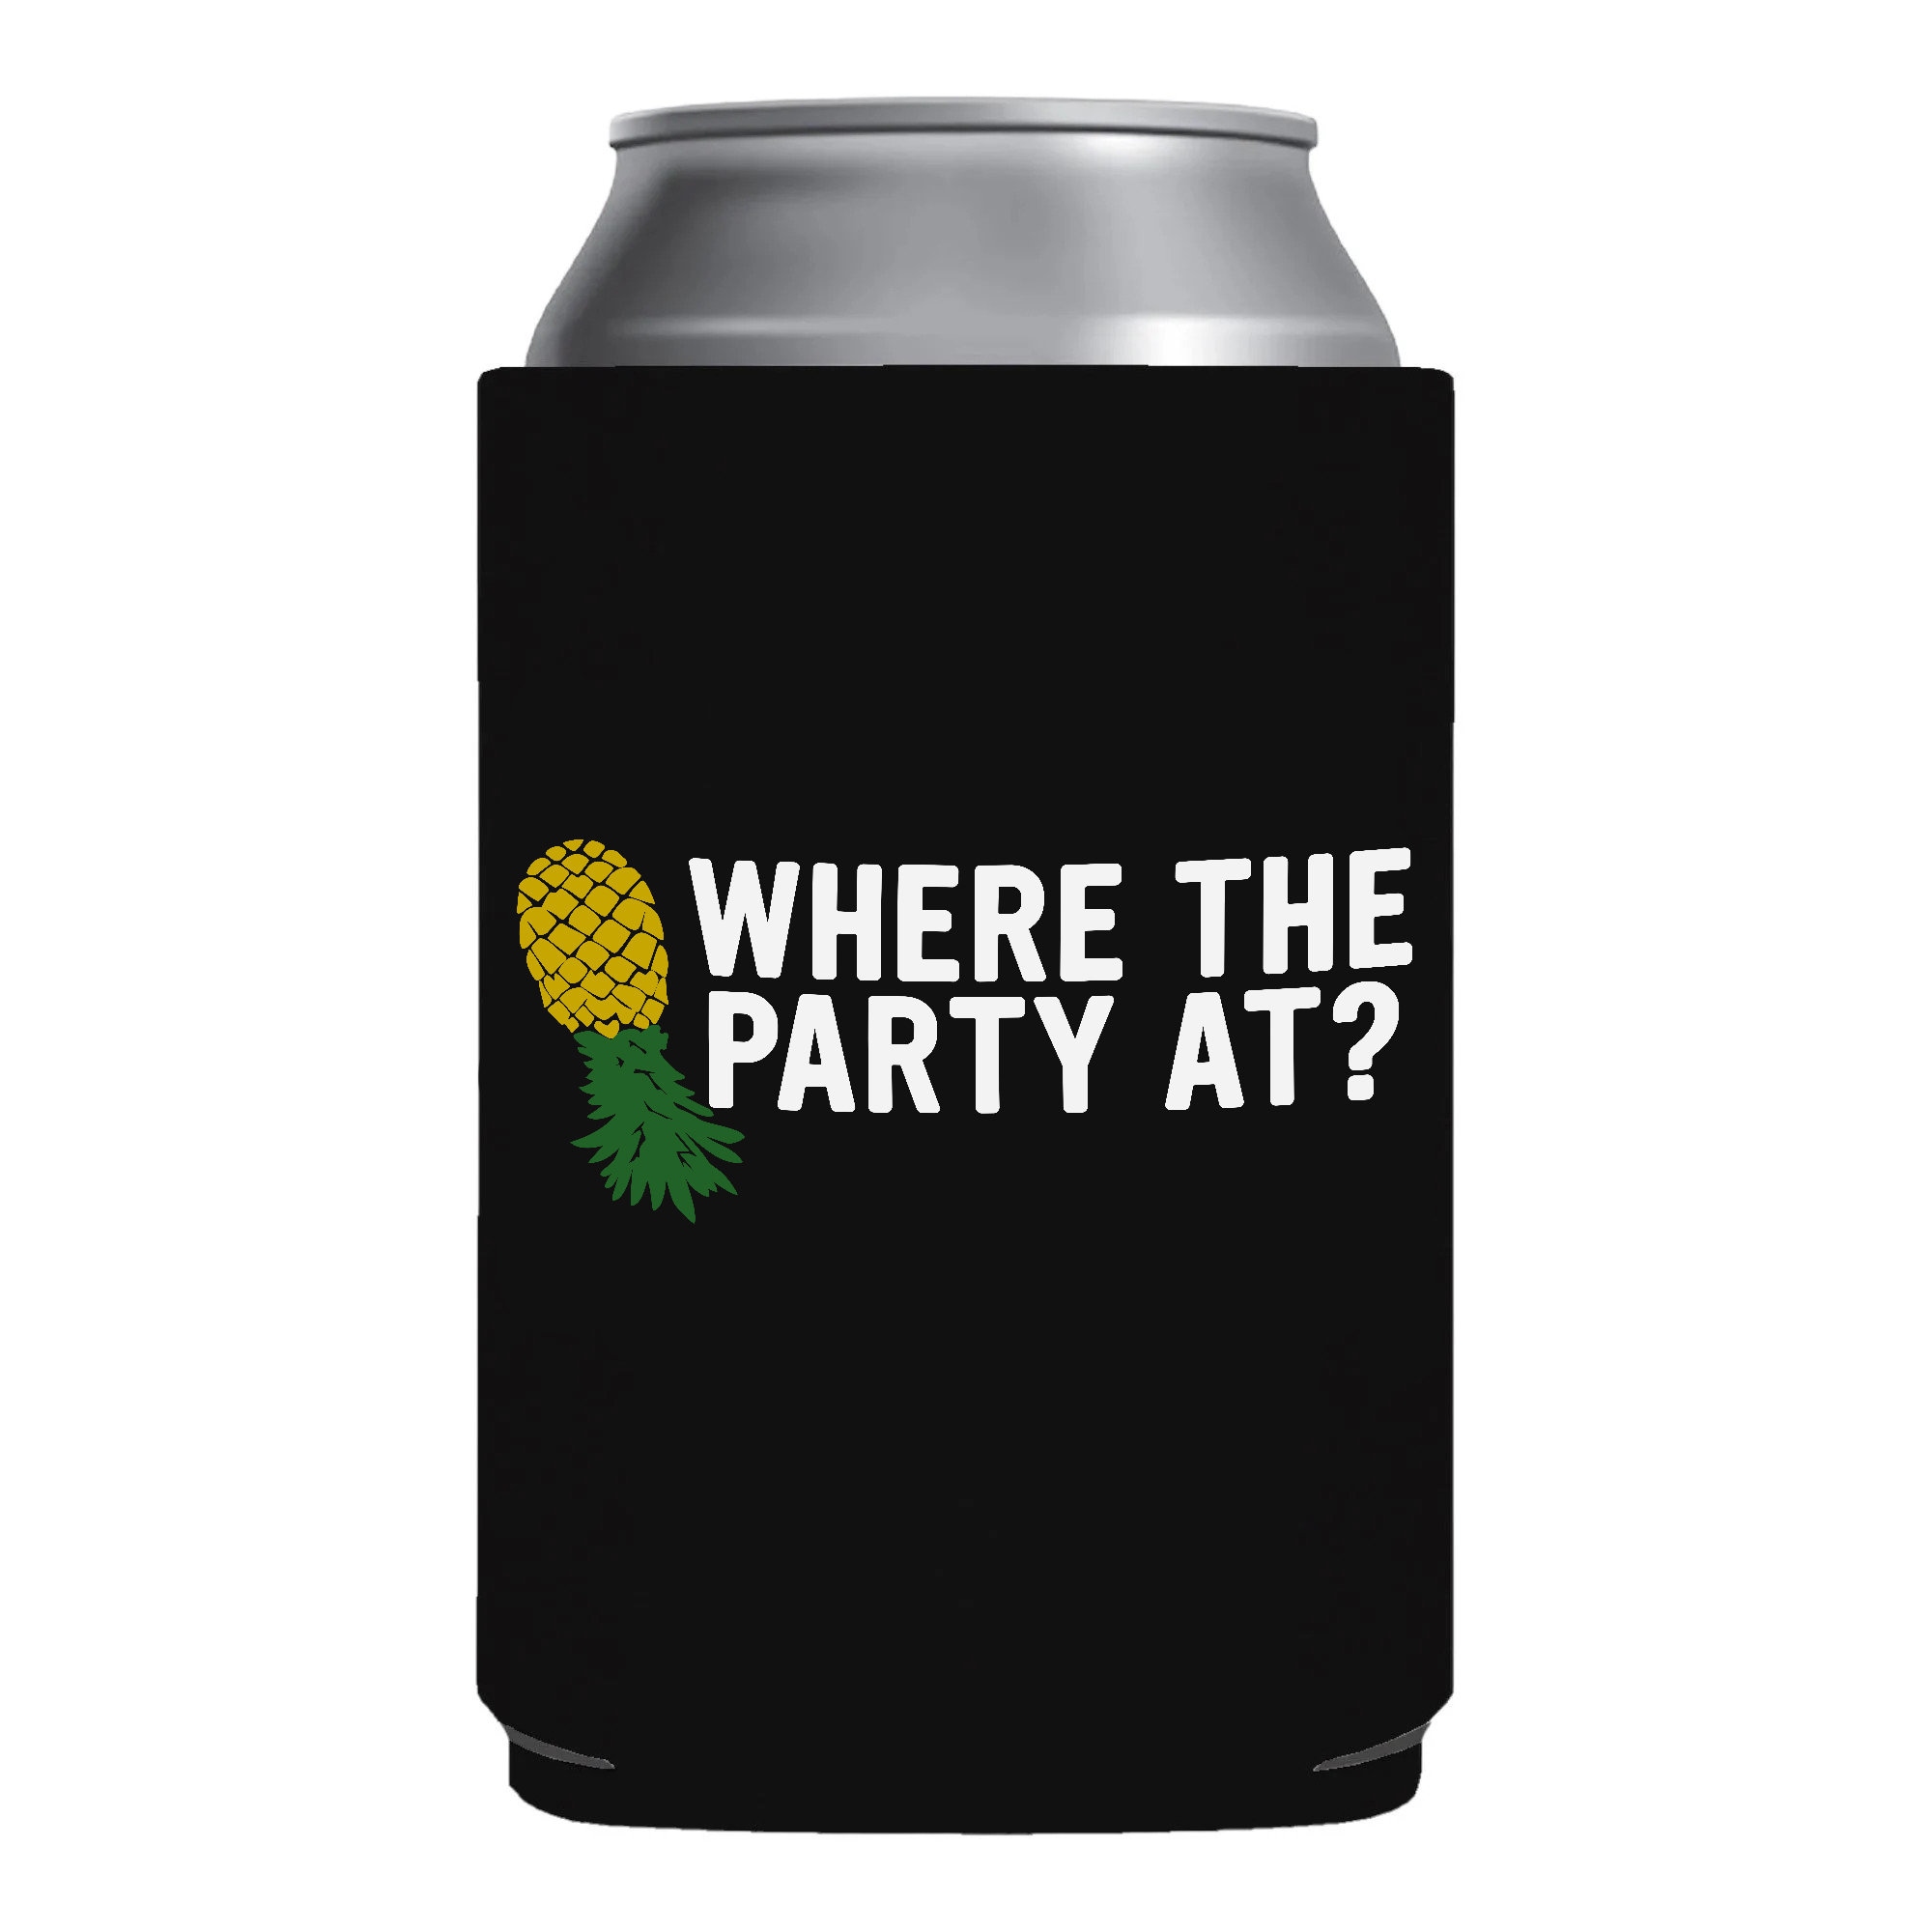 Funny Can Cooler // Beer Can Holder // Double Sided //